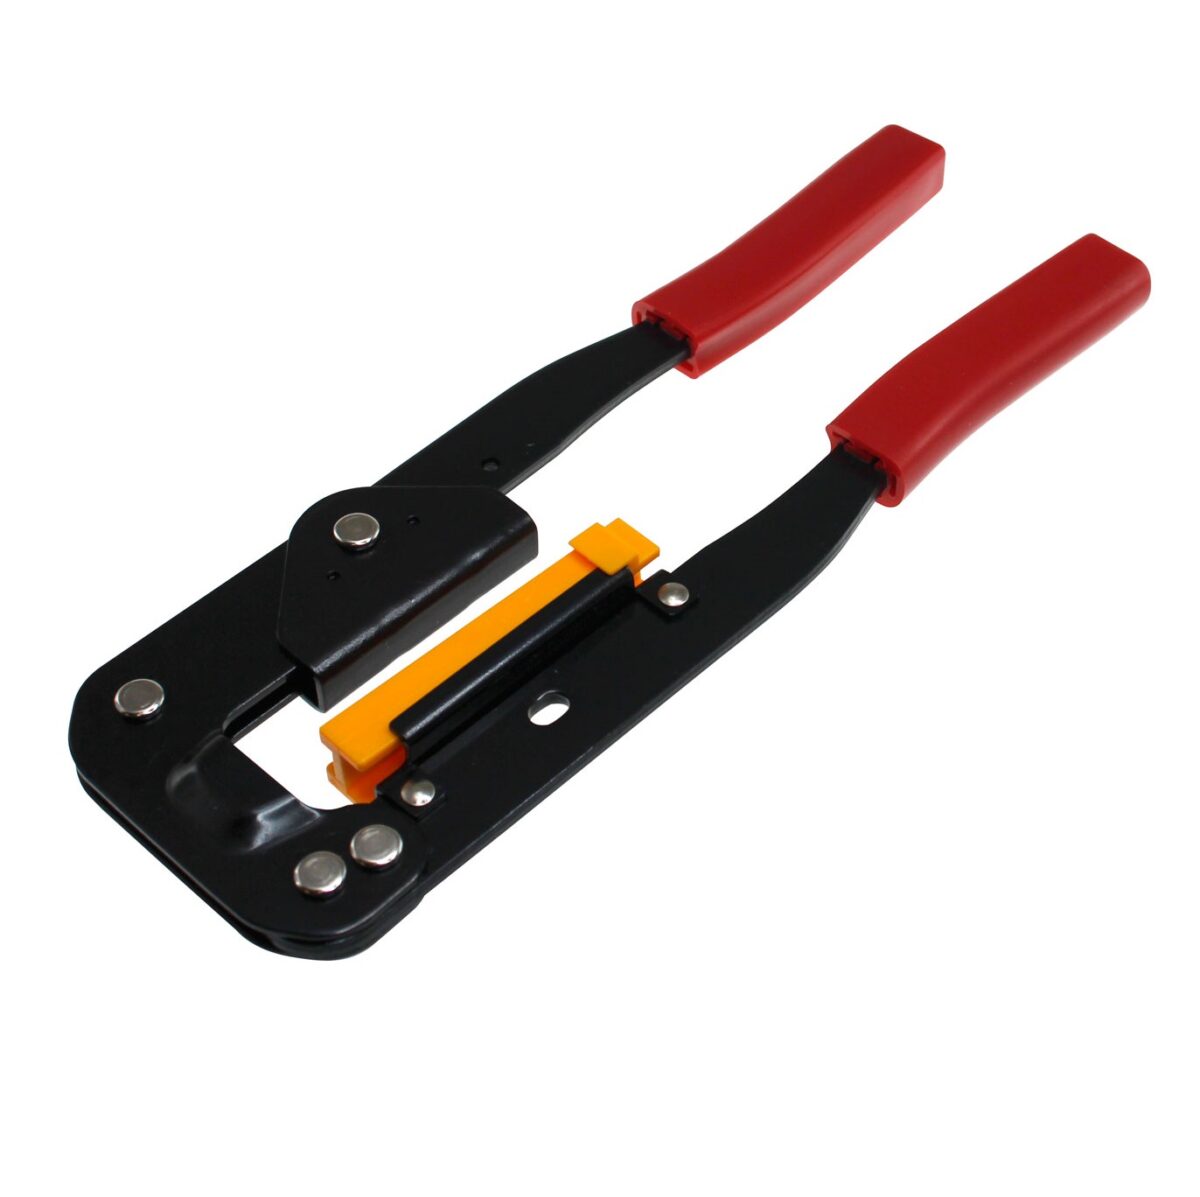 FRCI-DC Connector Crimping Tool sharvielectronics.com